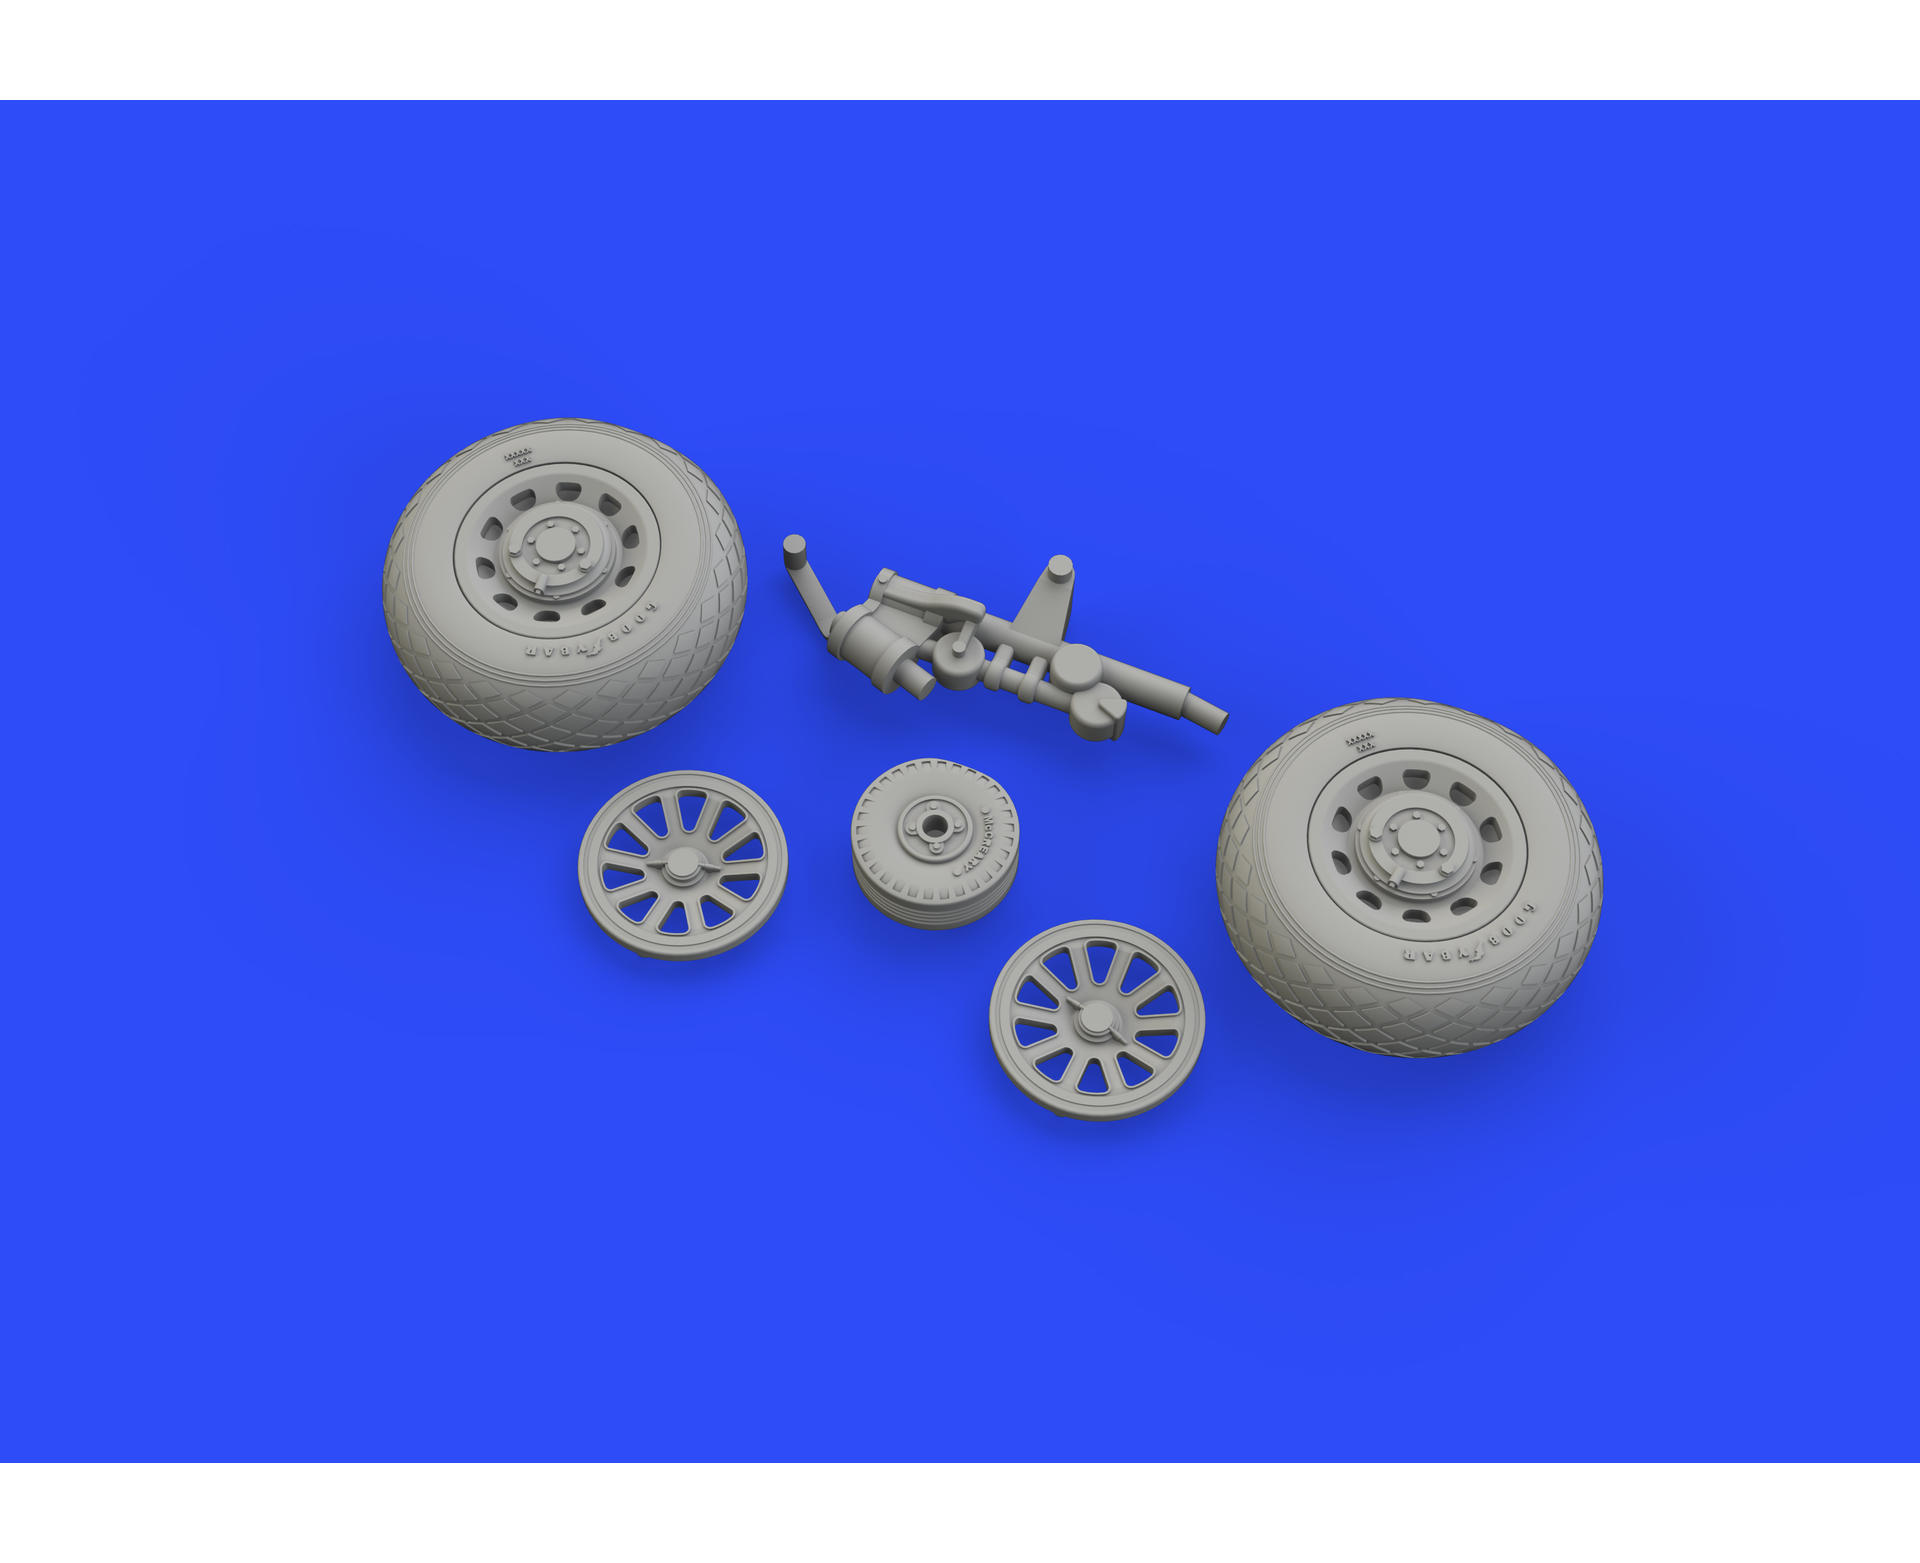 648258 EDUARD 1/48 AIRCRAFT P38 WHEELS FOR ACY PHOTO-ETCH & RESIN 